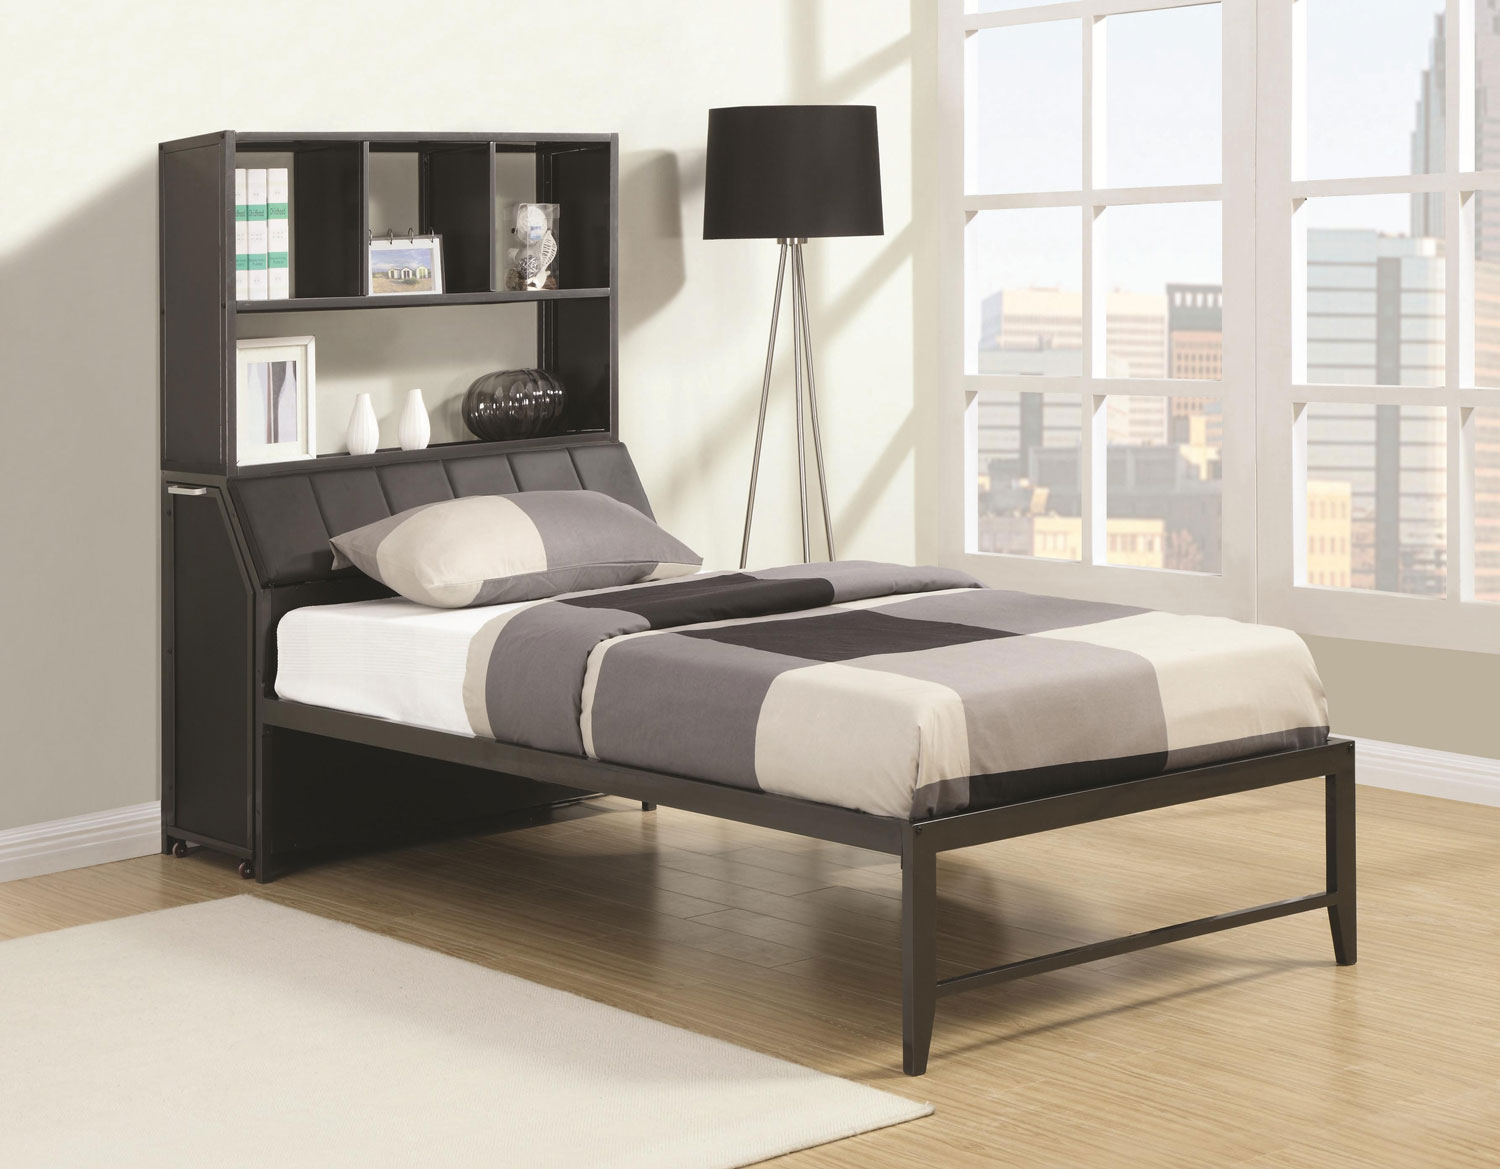 Coaster 460100 Twin Multi Function Bed - Black